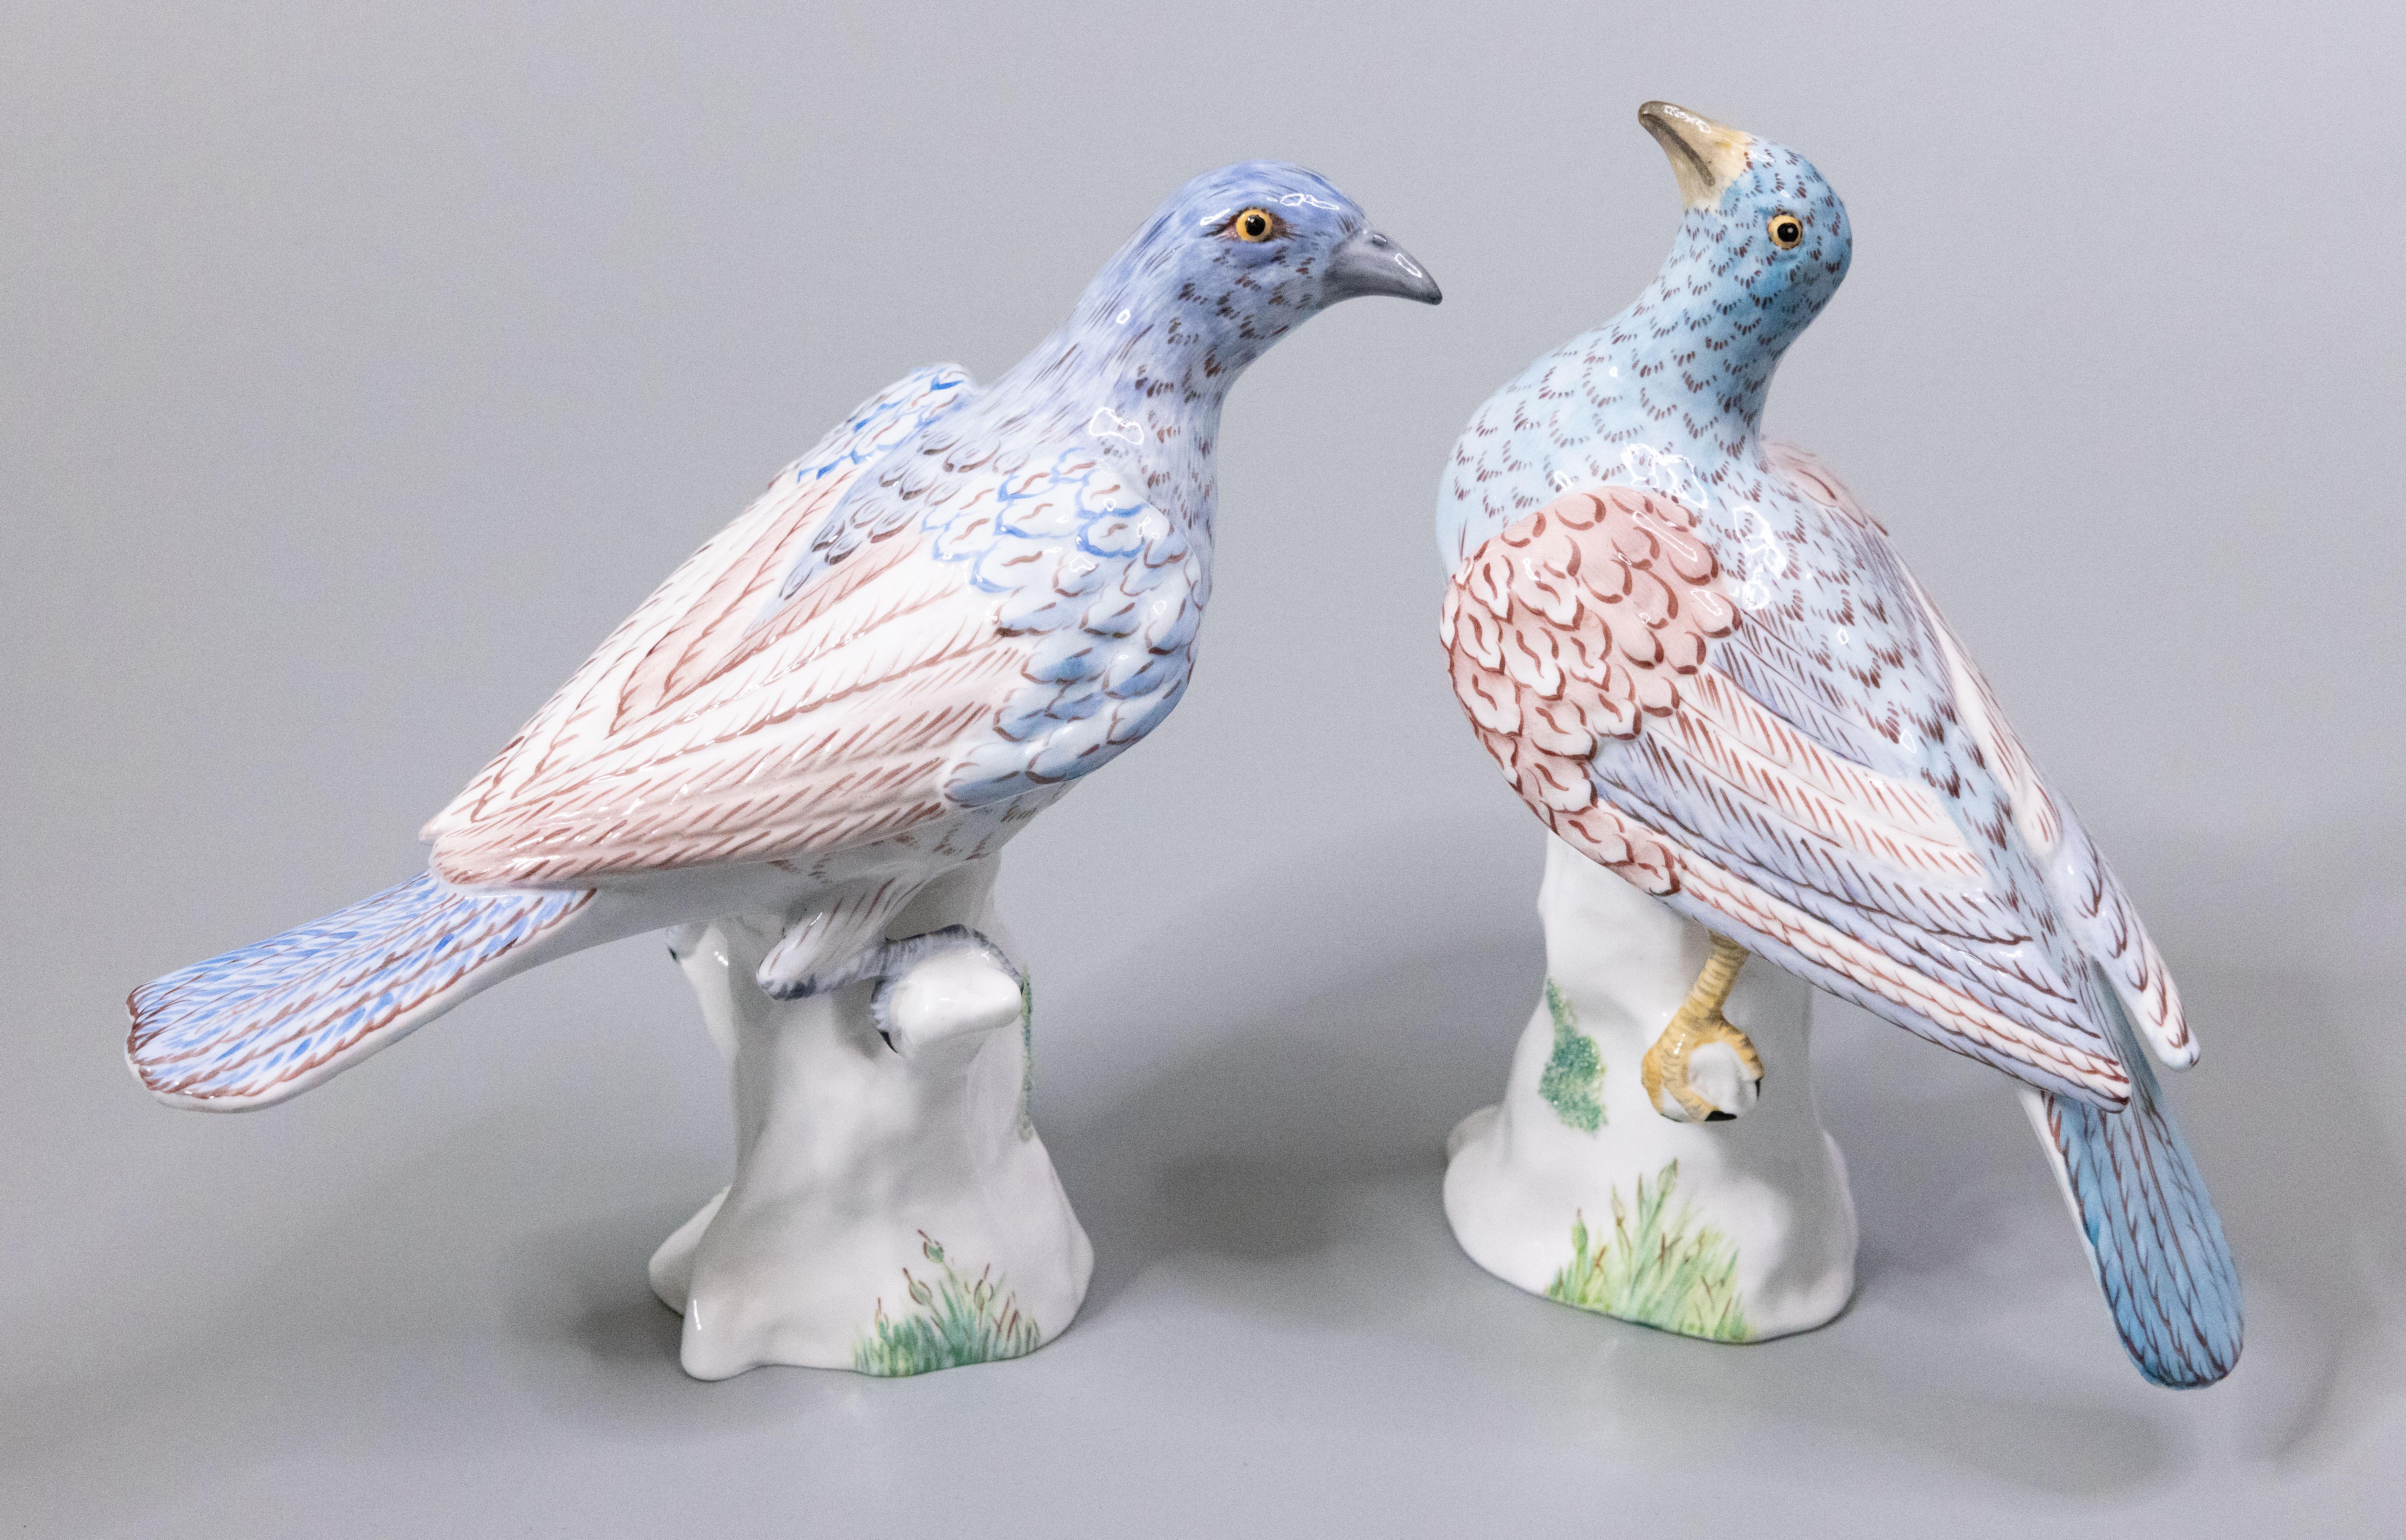 A stunning pair of English Staffordshire porcelain hand painted birds, circa 1930. Both are titled 